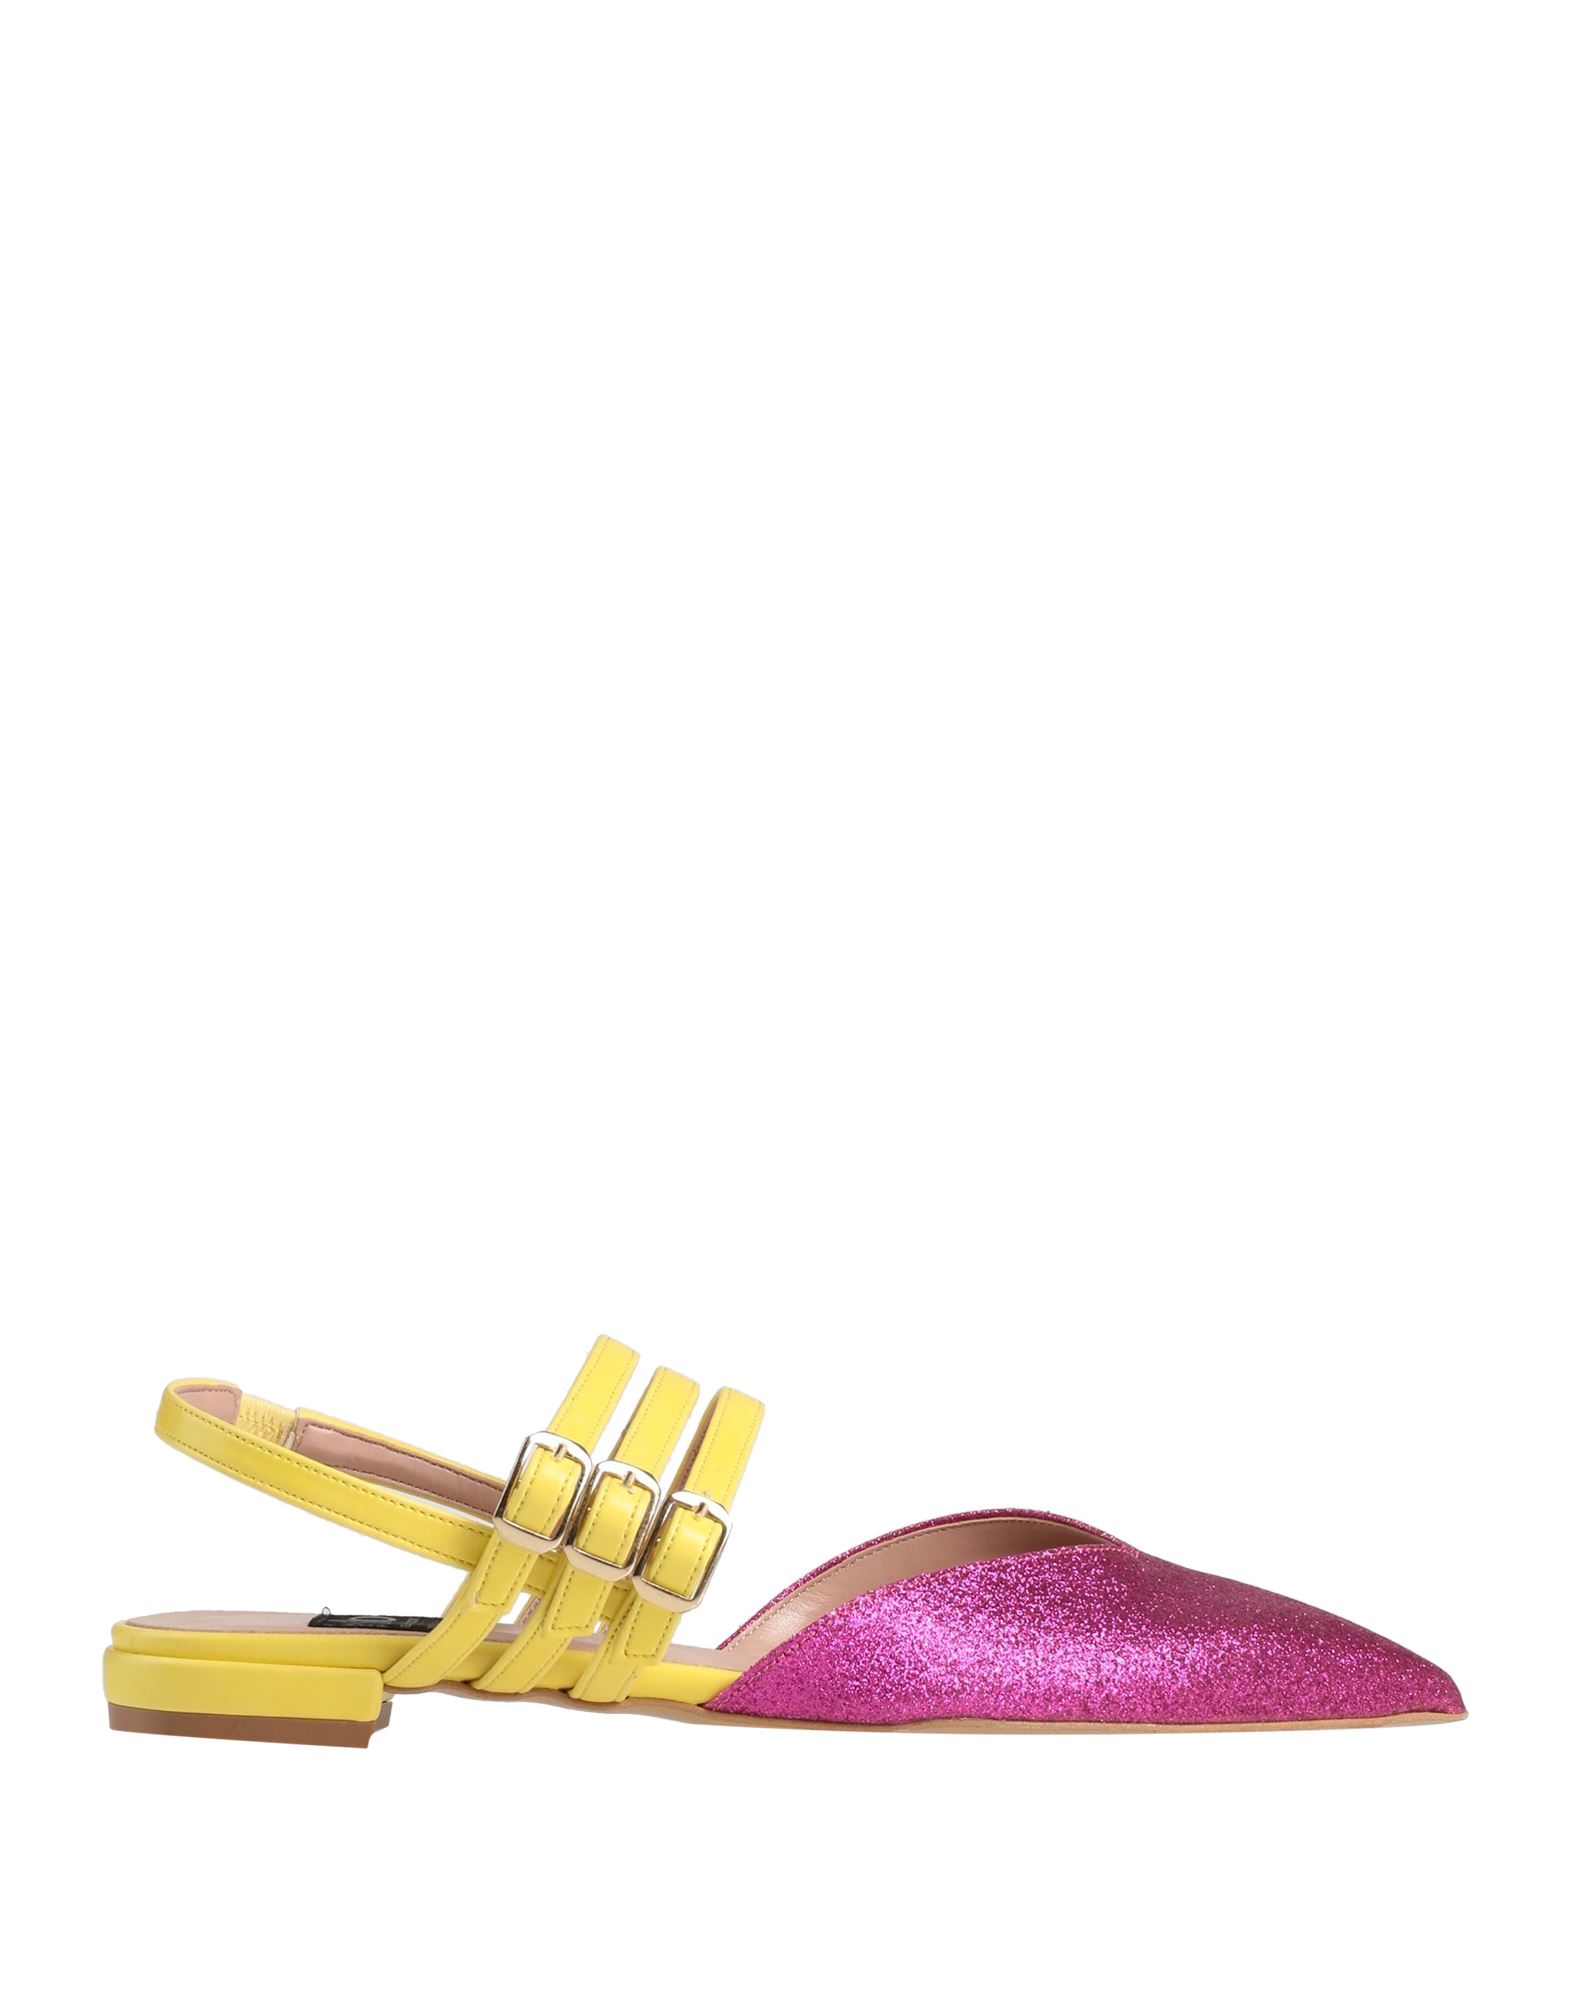 Islo Isabella Lorusso Ballet Flats In Pink